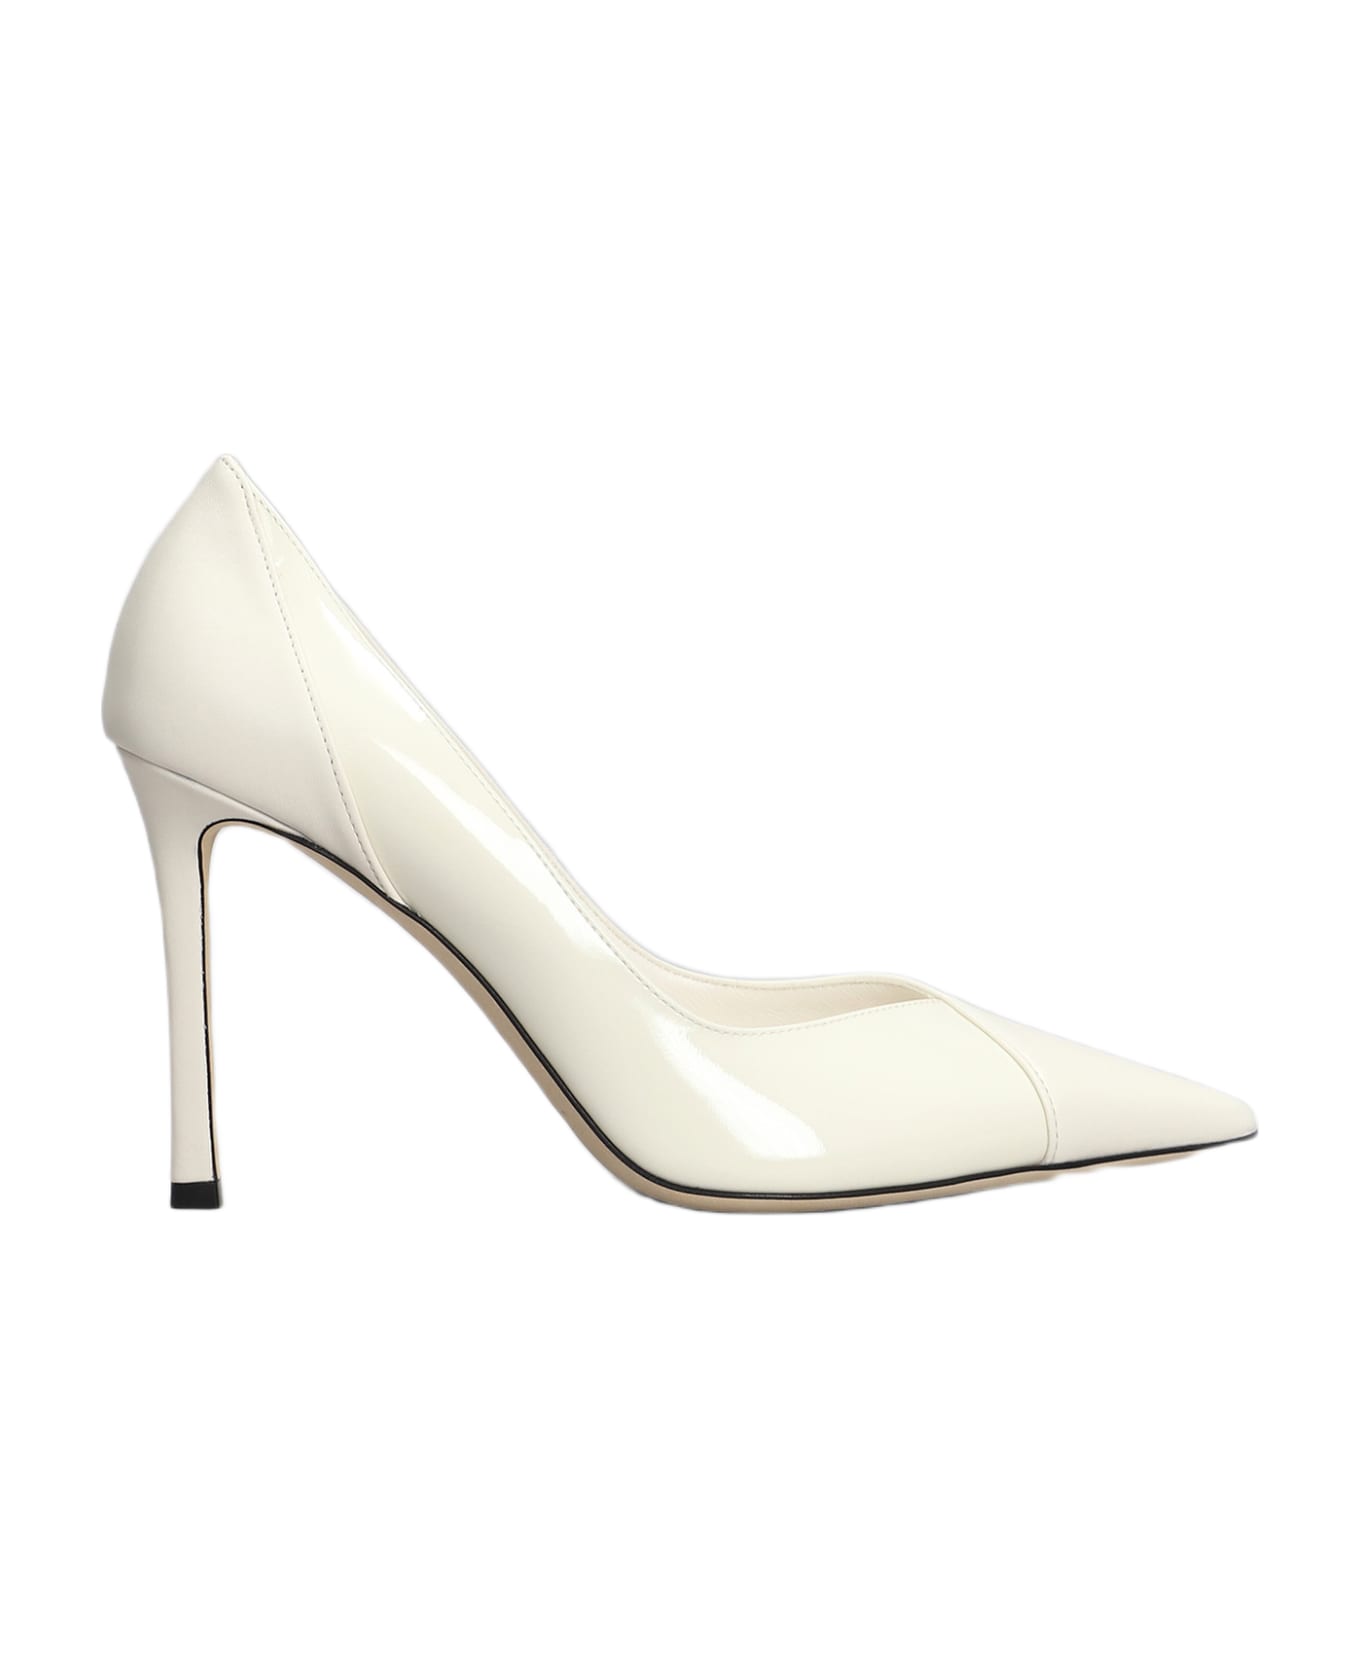 Jimmy Choo Cass 95 Pumps In White Patent Leather - white